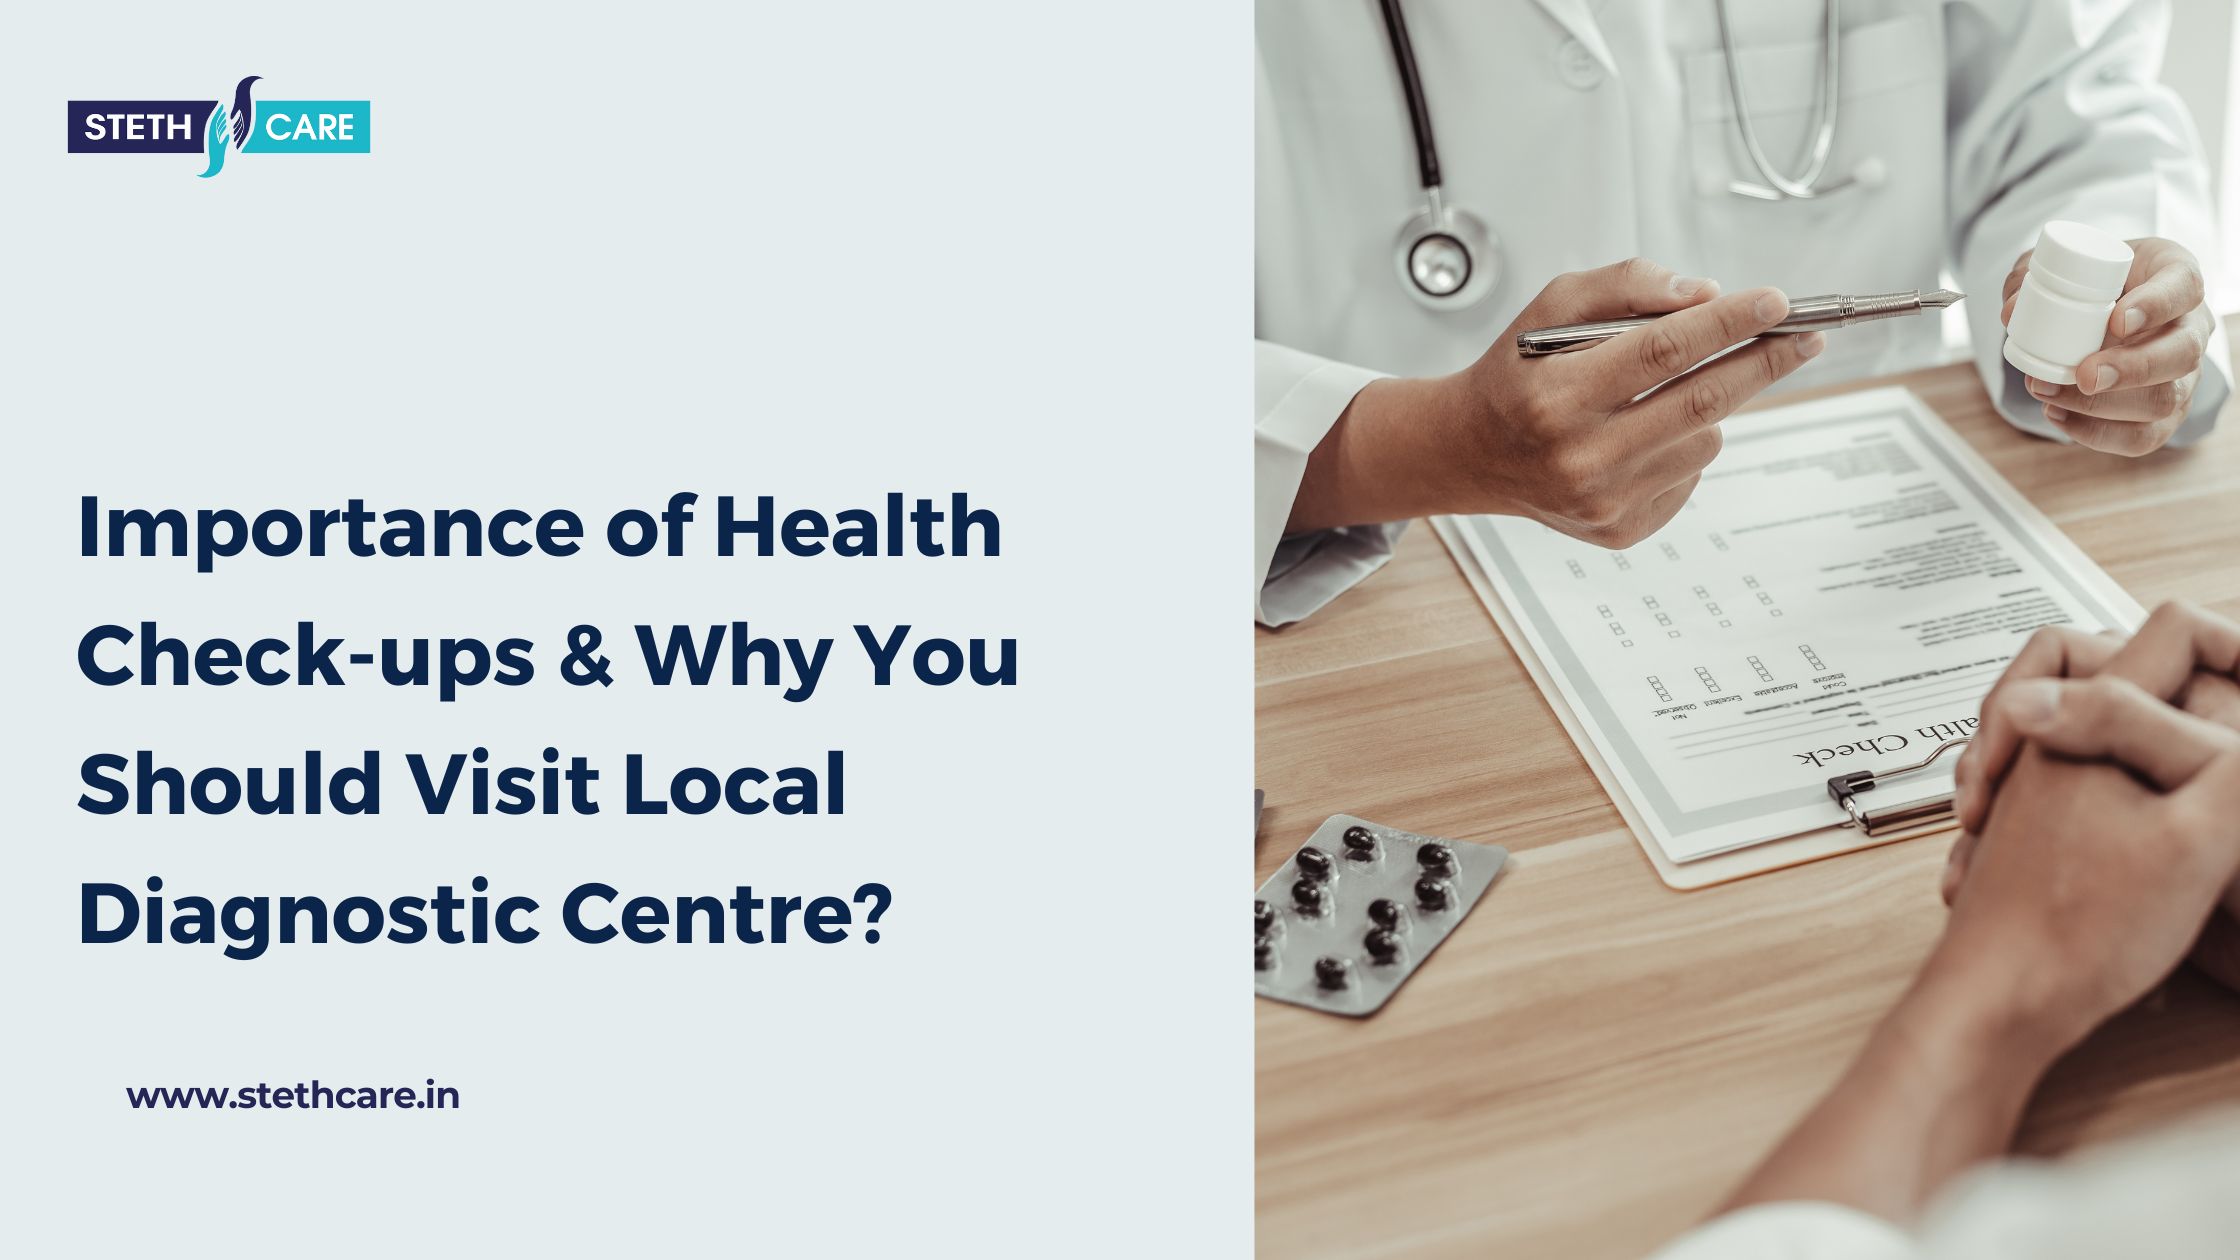 The Importance of Regular Health Check-ups & Why You Should Visit Local Diagnostic Centre